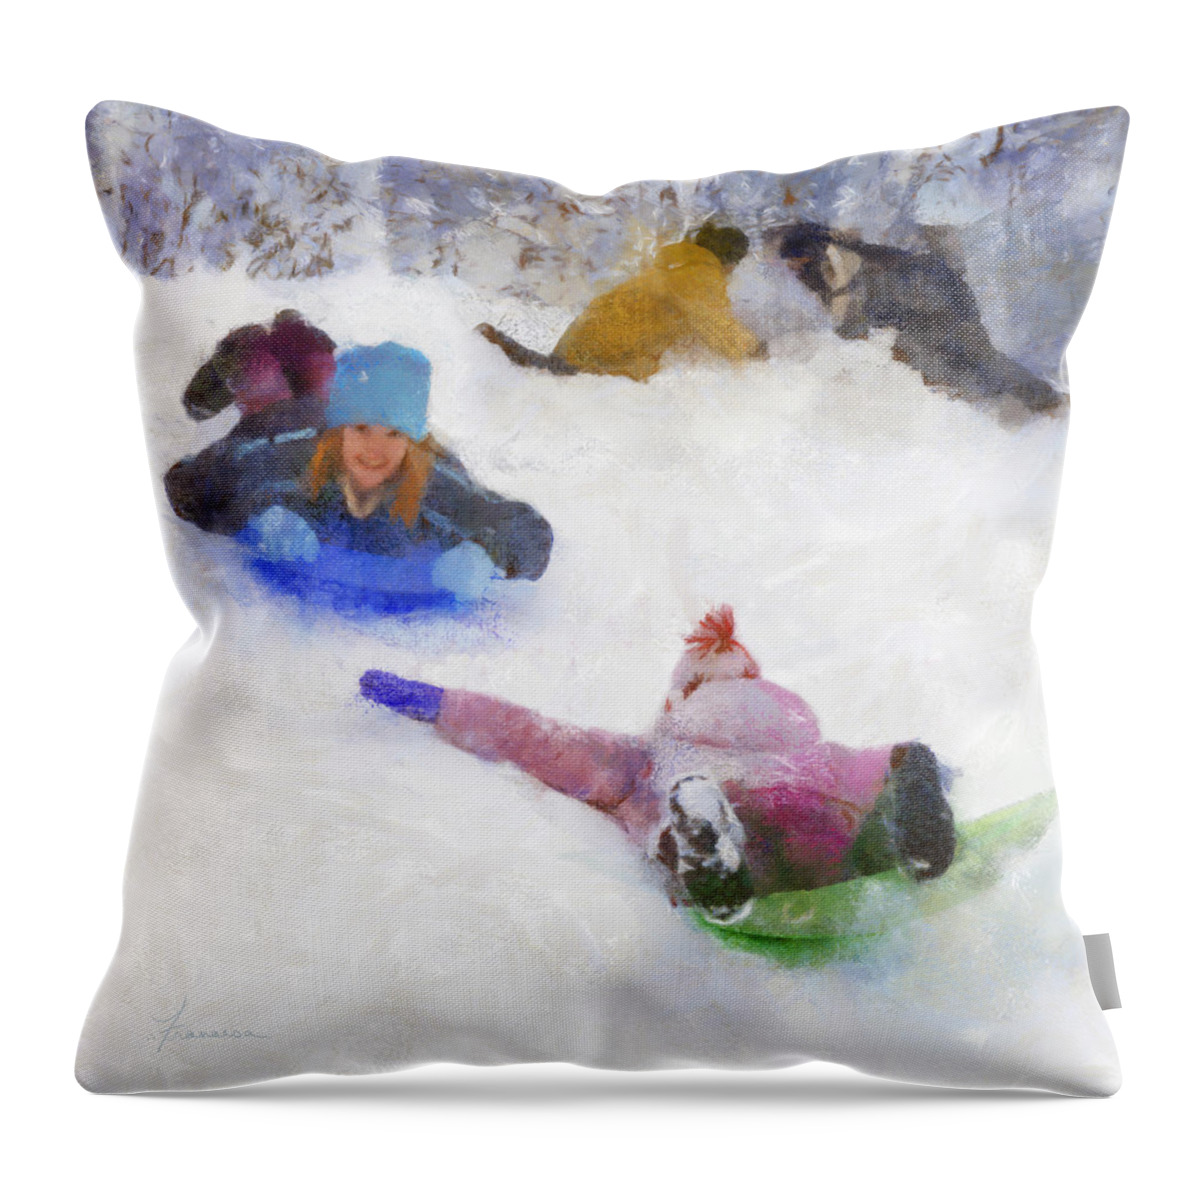 Children Child Boys Girls Winter Snow Hill Sled Sledding Build Building Fort Snowballs Cold Sport Activity Play Fun Throw Pillow featuring the digital art Snow Fun by Frances Miller